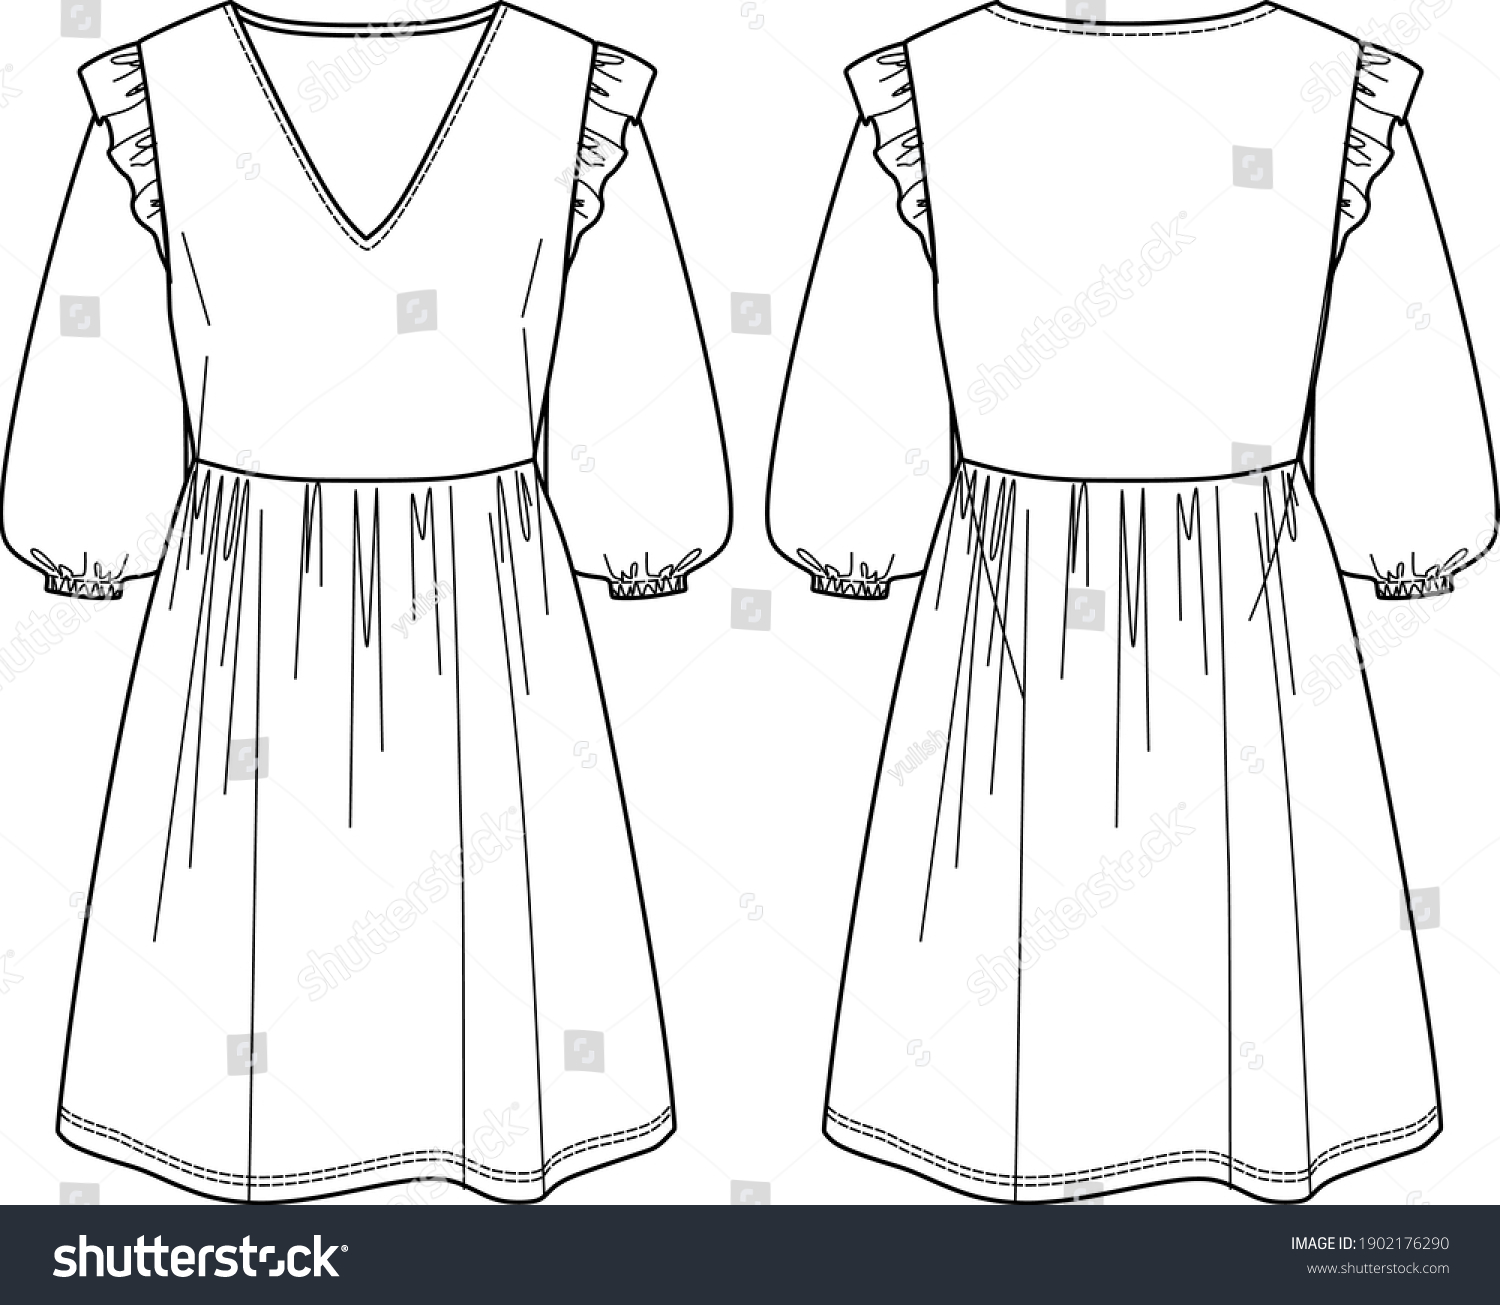 15,367 Dress technical drawing Images, Stock Photos & Vectors ...